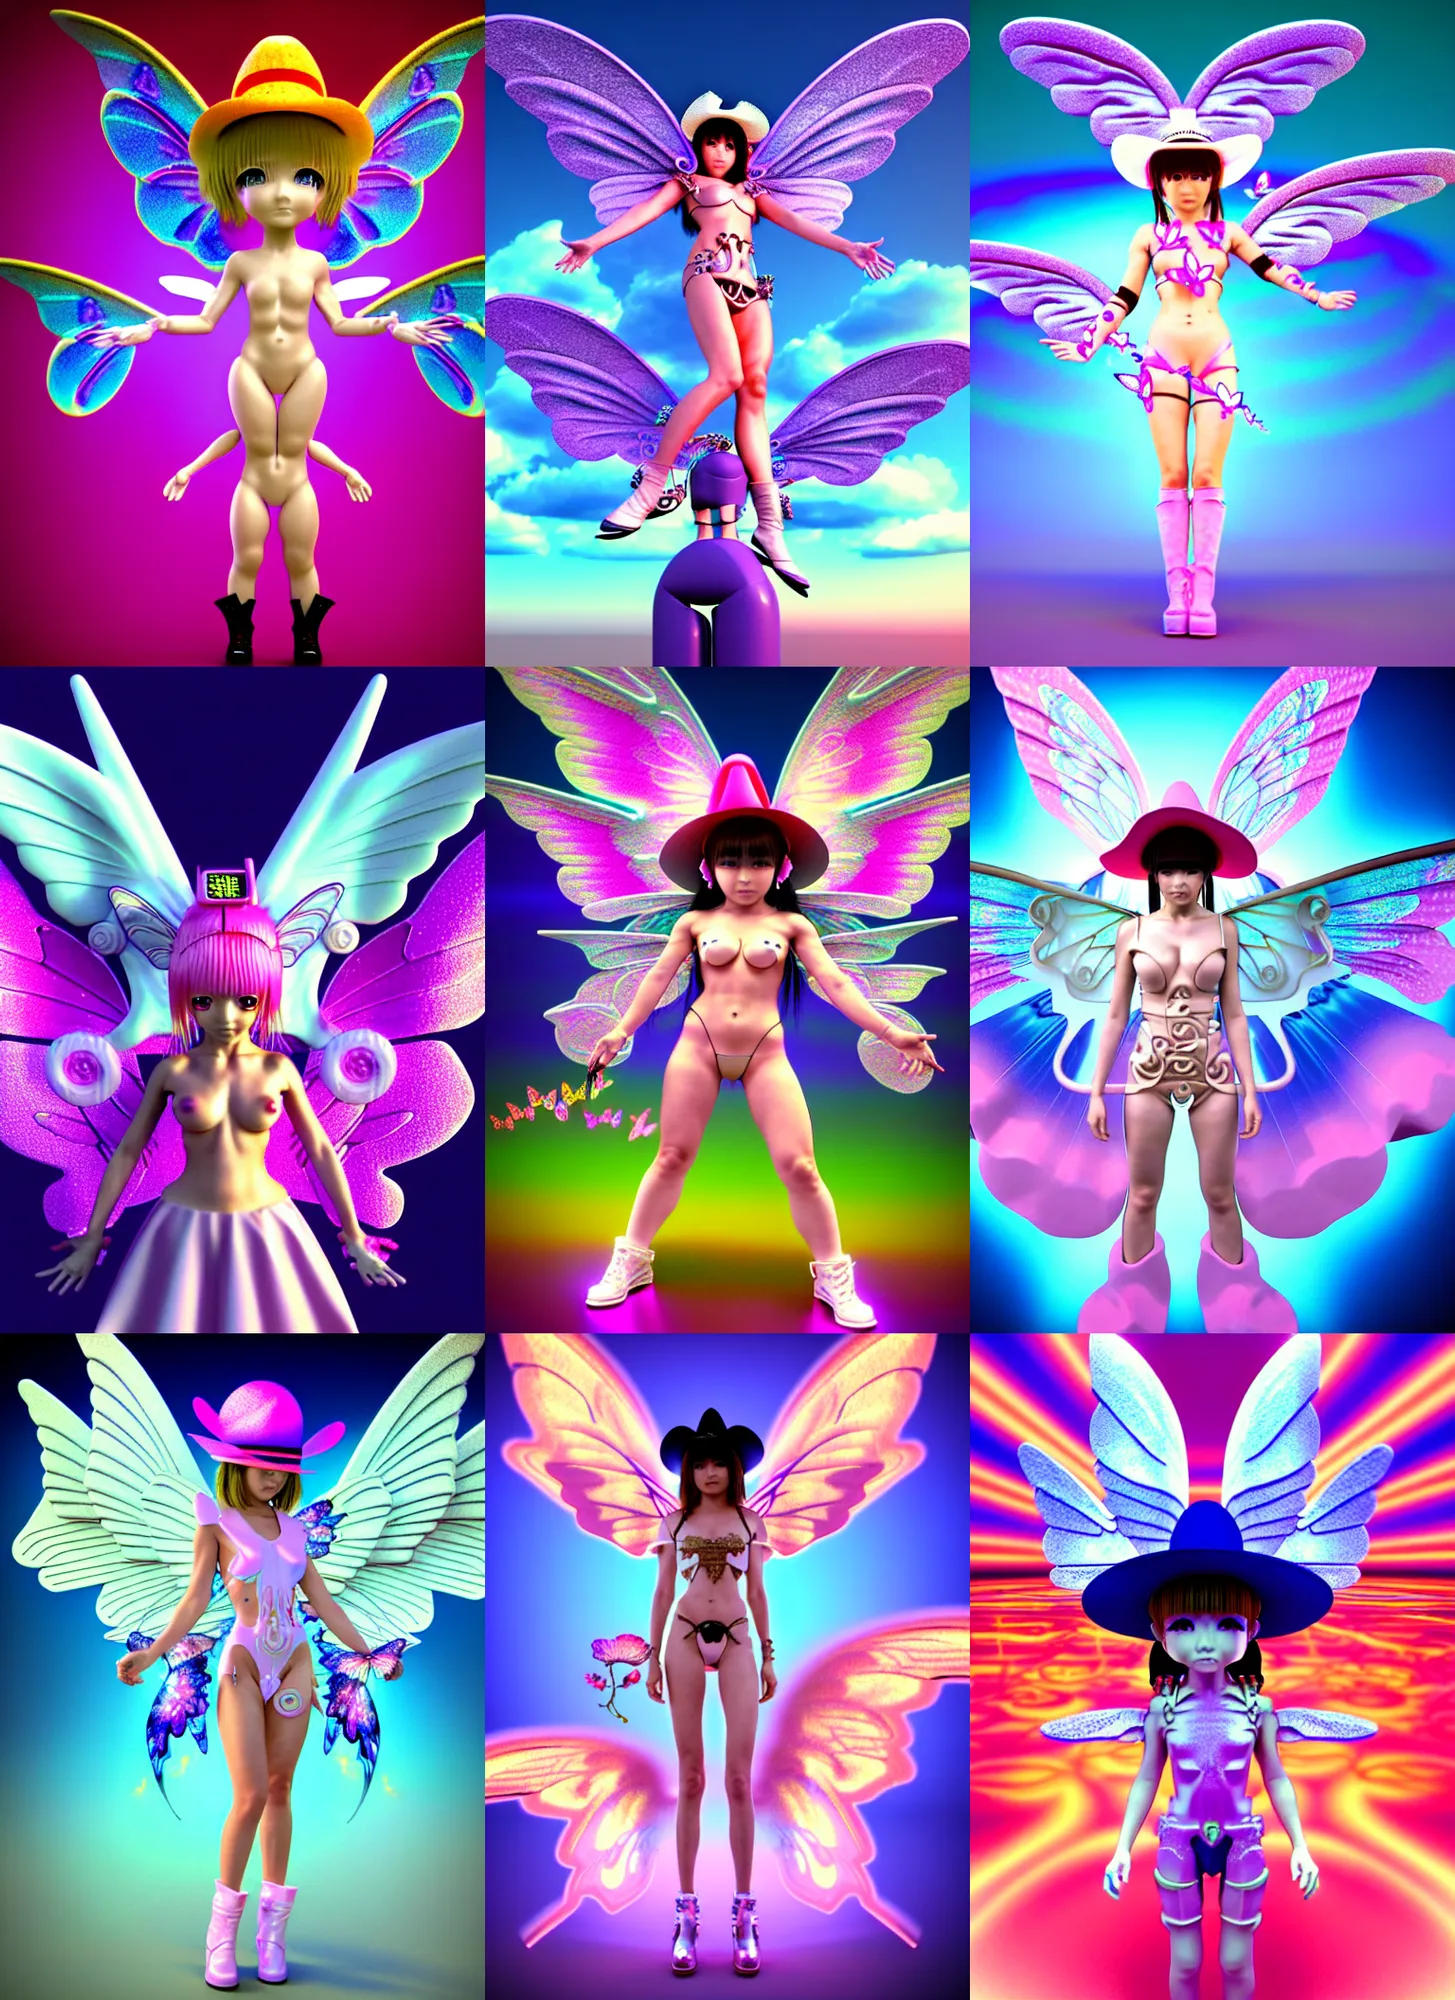 Prompt: 3d render of chibi cyborg fairy angel by Ichiro Tanida wearing a big cowboy hat and wearing angel wings against a psychedelic swirly background with 3d butterflies and 3d flowers n the style of 1990's CG graphics 3d rendered y2K aesthetic by Ichiro Tanida, 3DO magazine